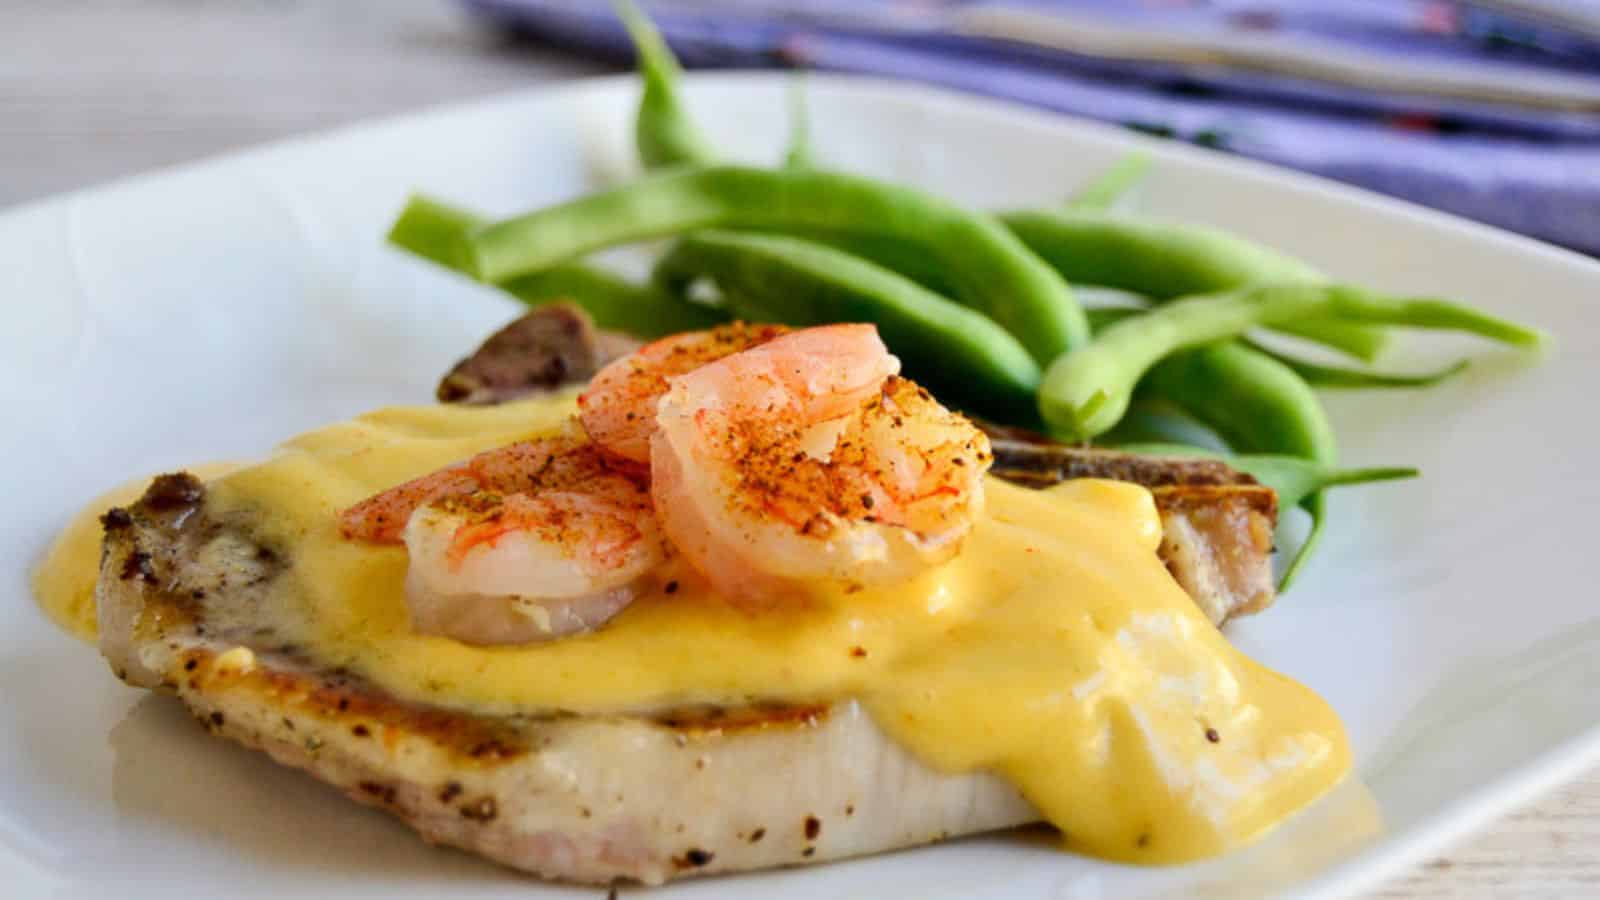 Bone in pork chop topped with hollandaise sauce and shrimp, on a white plate next to green beans.